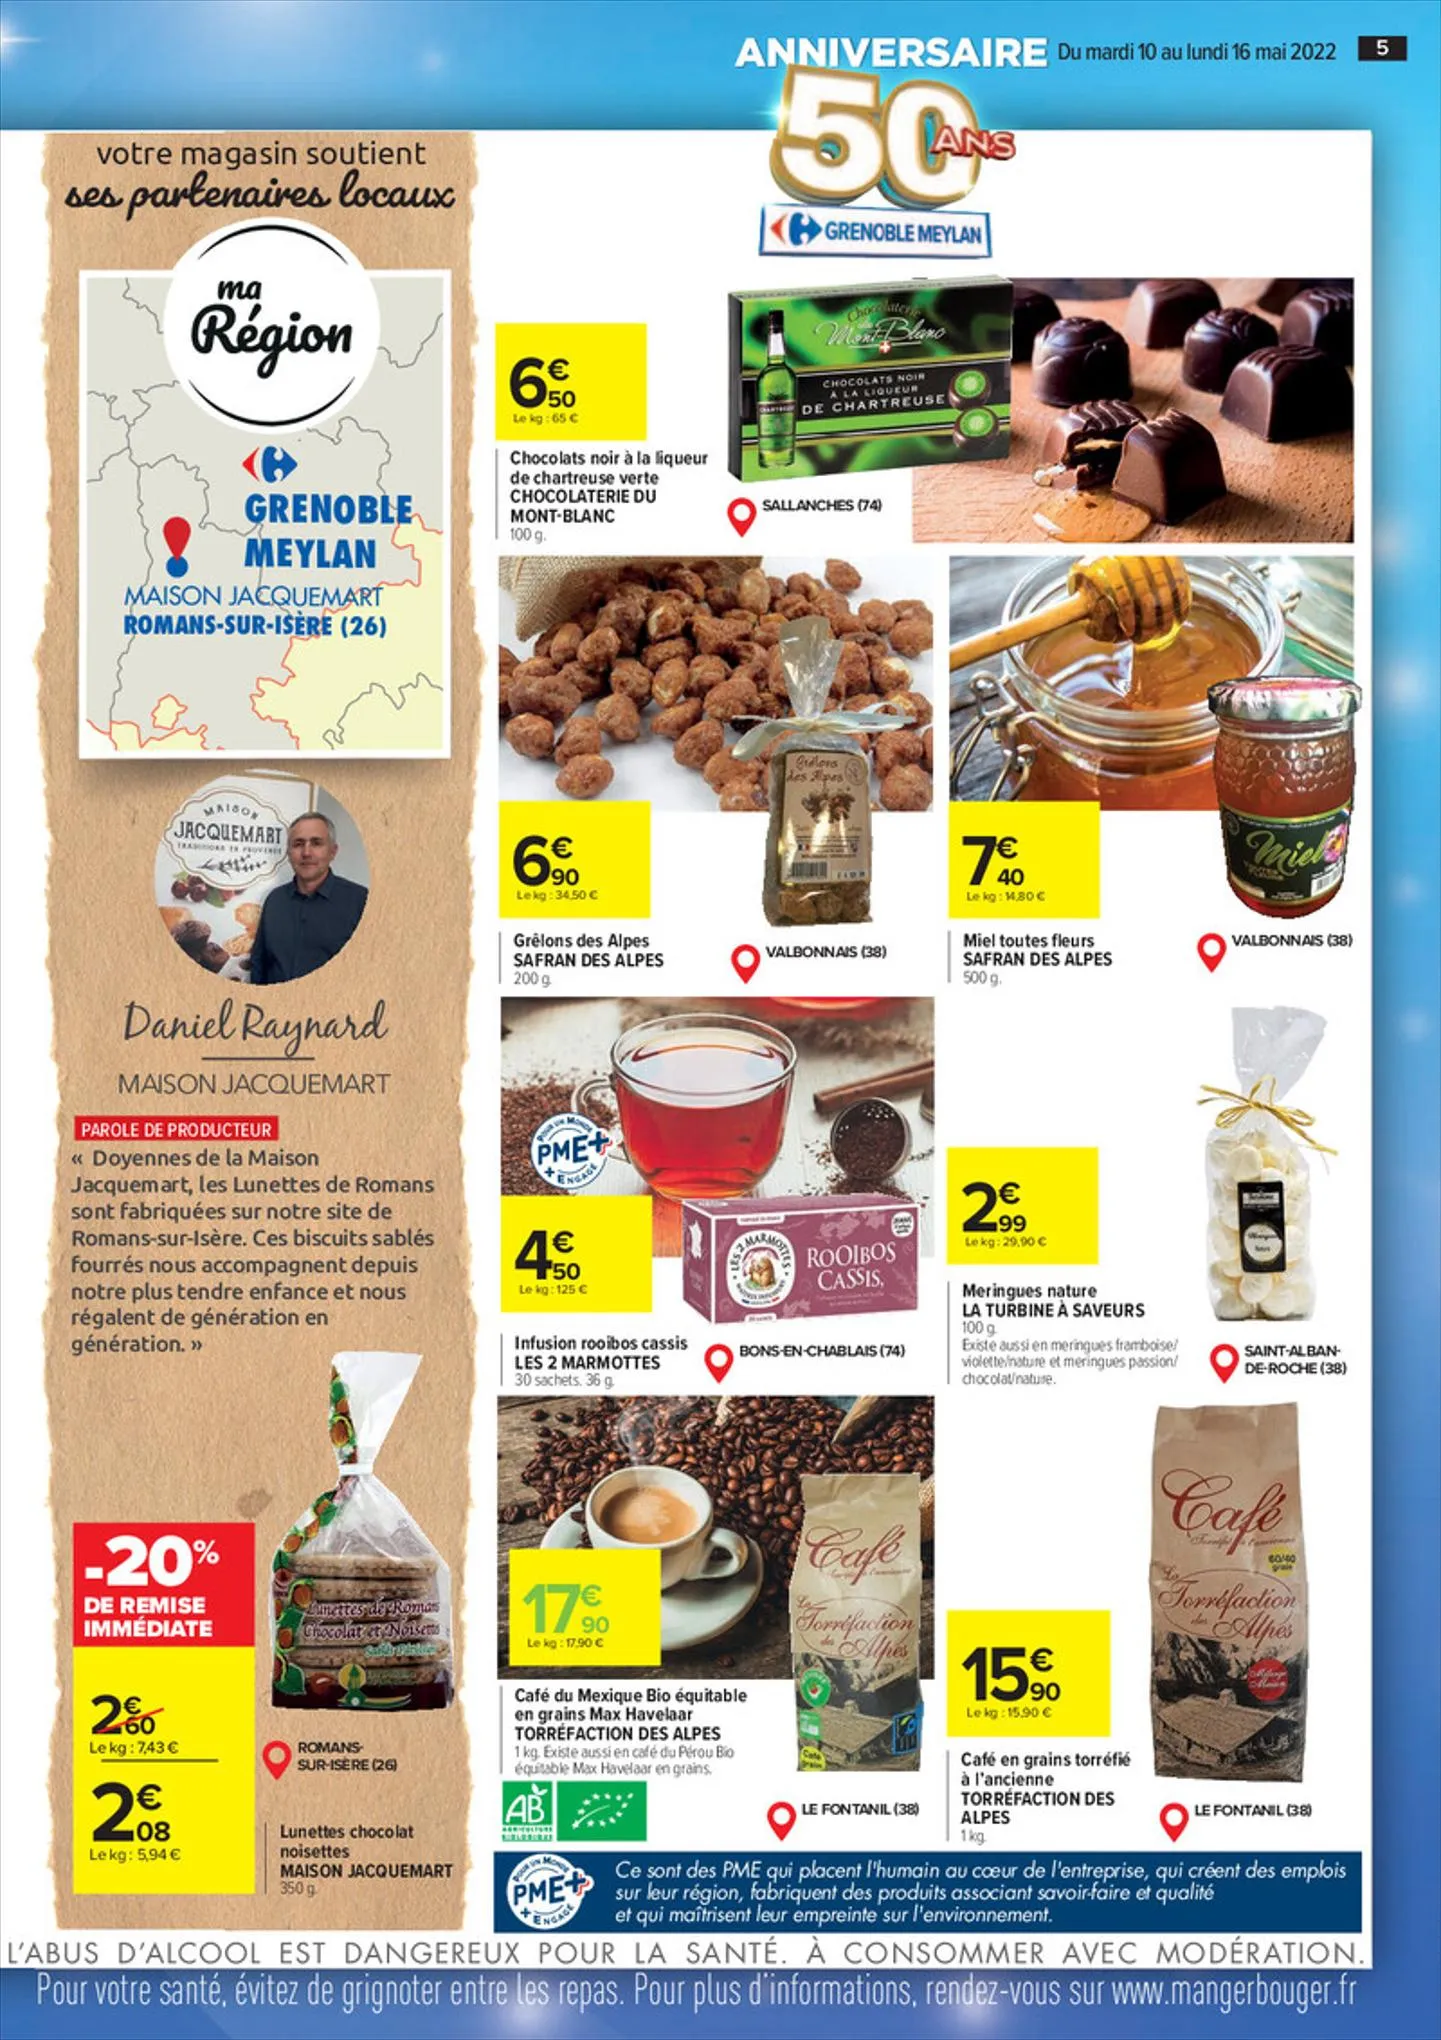 Catalogue Anniversaire 50 ans Grenoble Meylan, page 00005